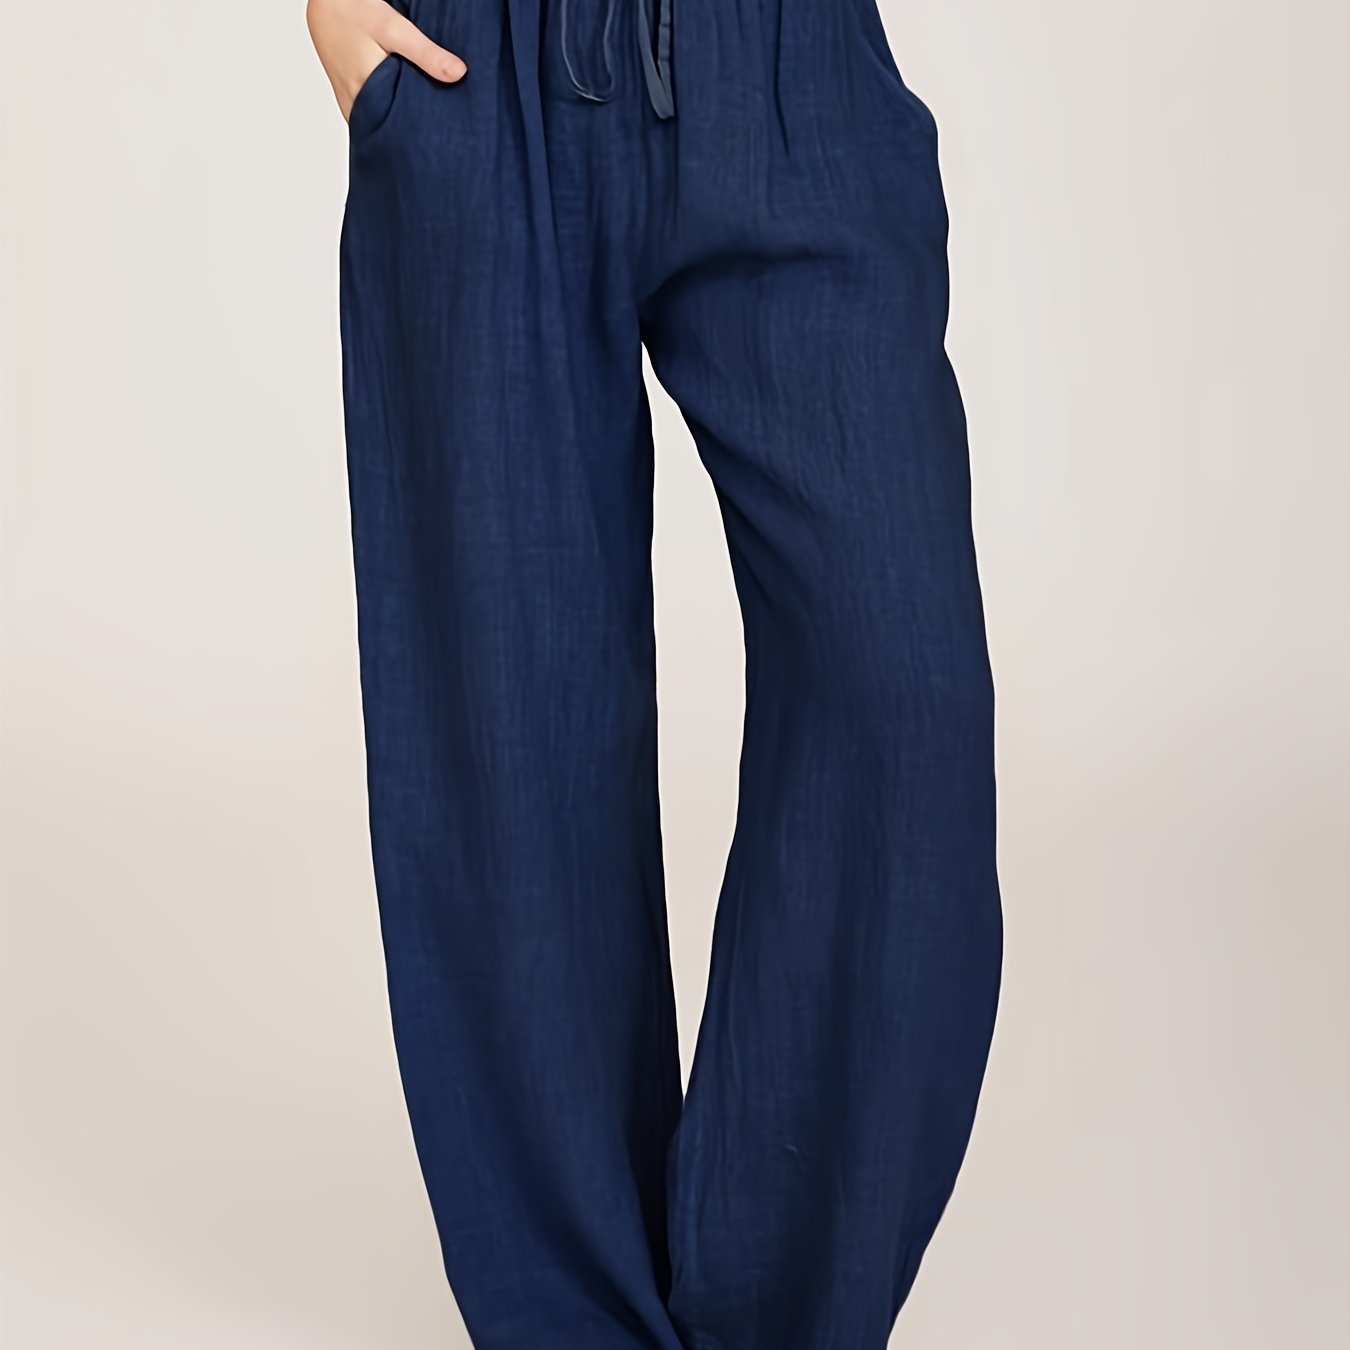 「binfenxie」Drawstring Wide Leg Pants, Solid Loose Palazzo Pants, Casual Every Day Pants, Women's Clothing